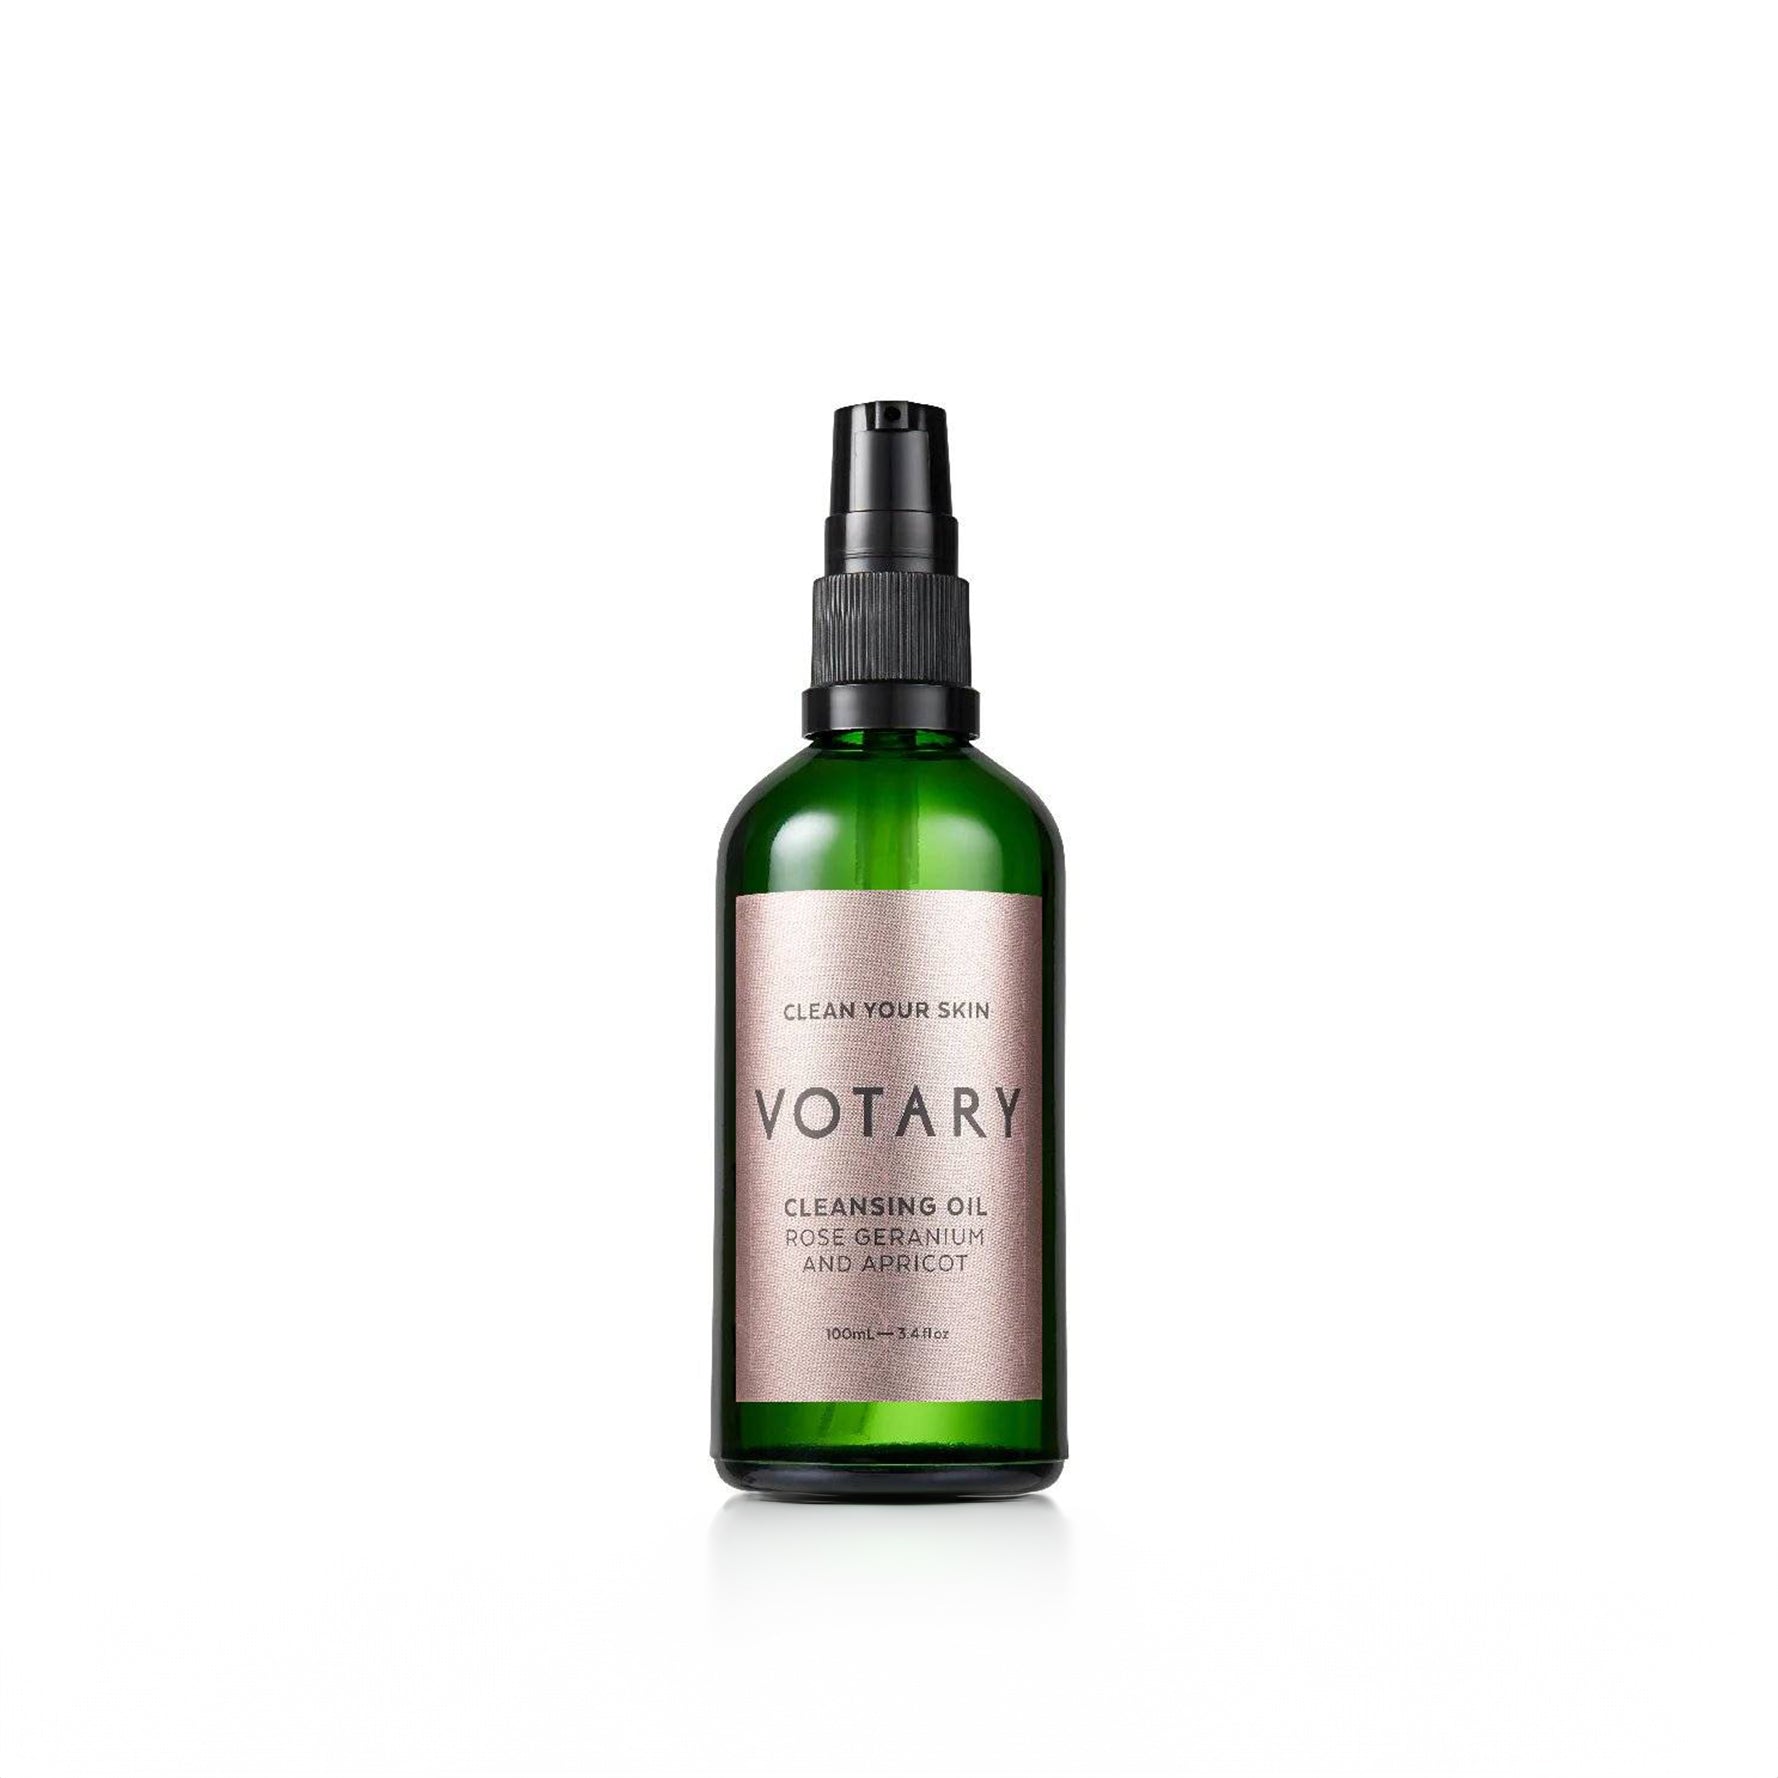 Votary - Rose Geranium and Apricot Cleansing Oil